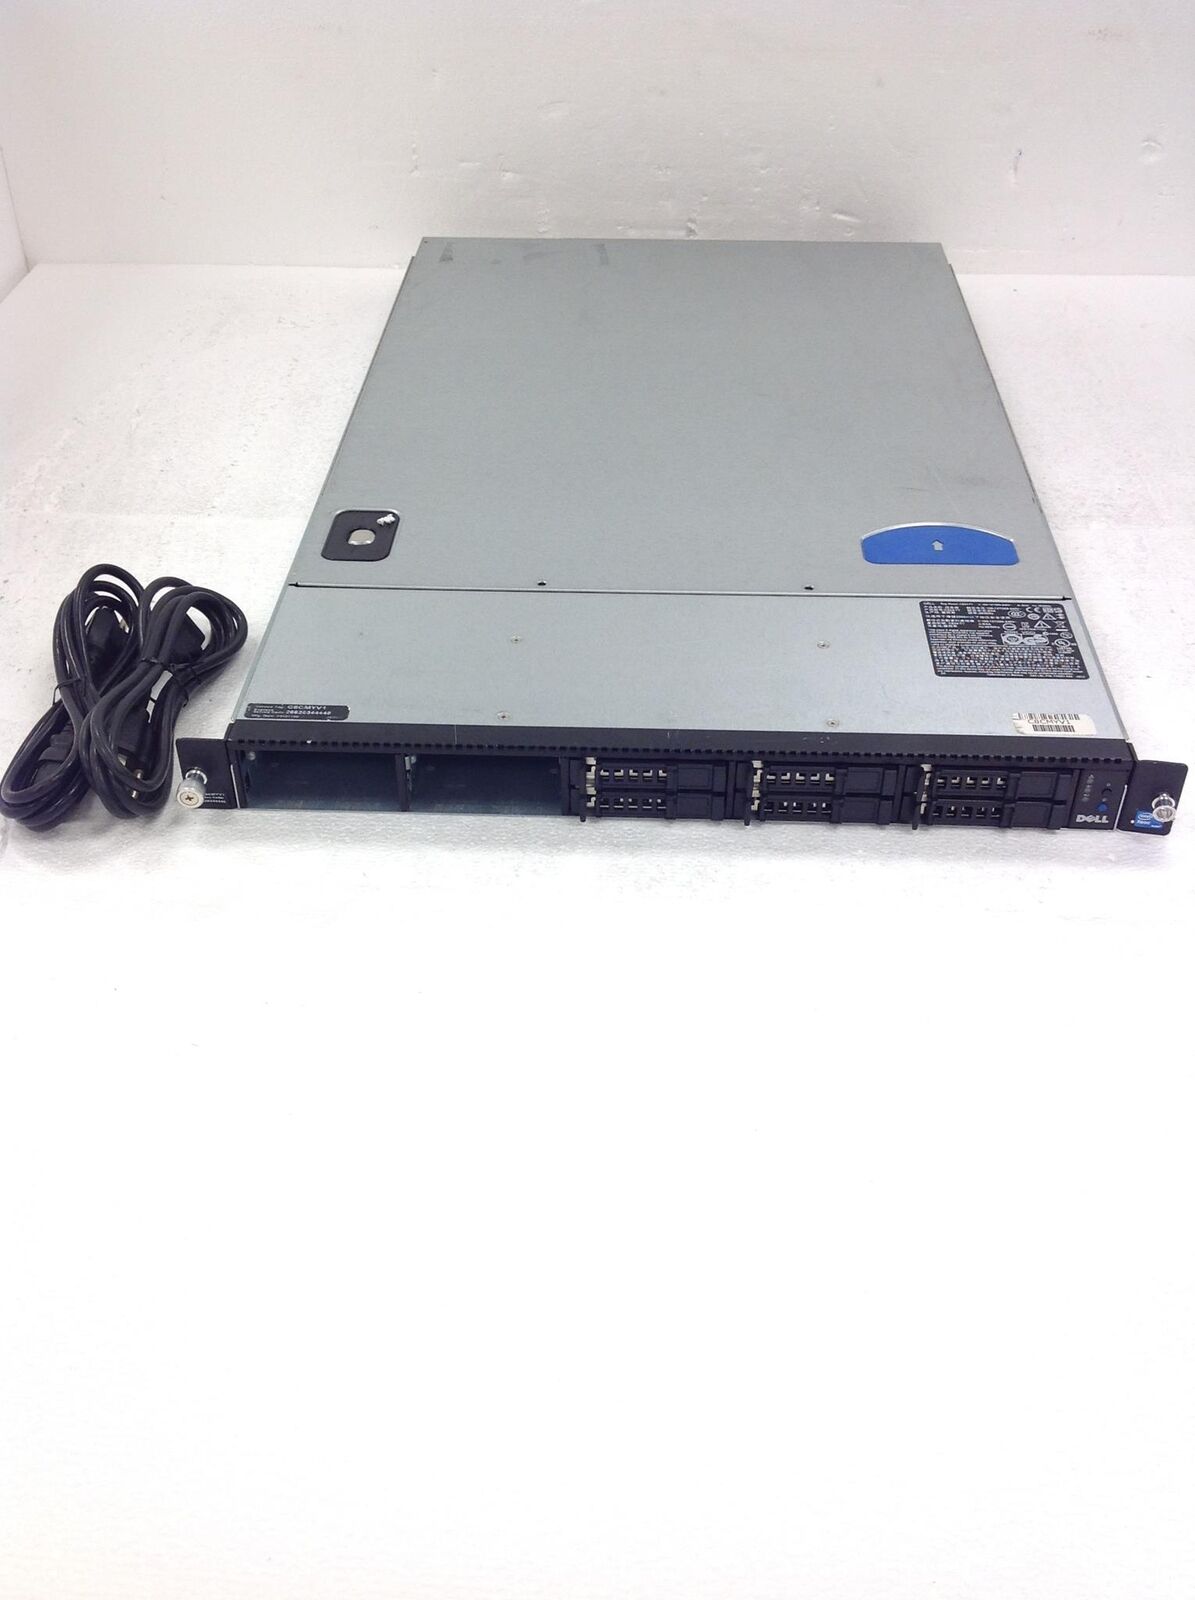 Dell CS24-TY Server With 2 Intel Xeon E5640 1 Power Supply 8GB RAM Working